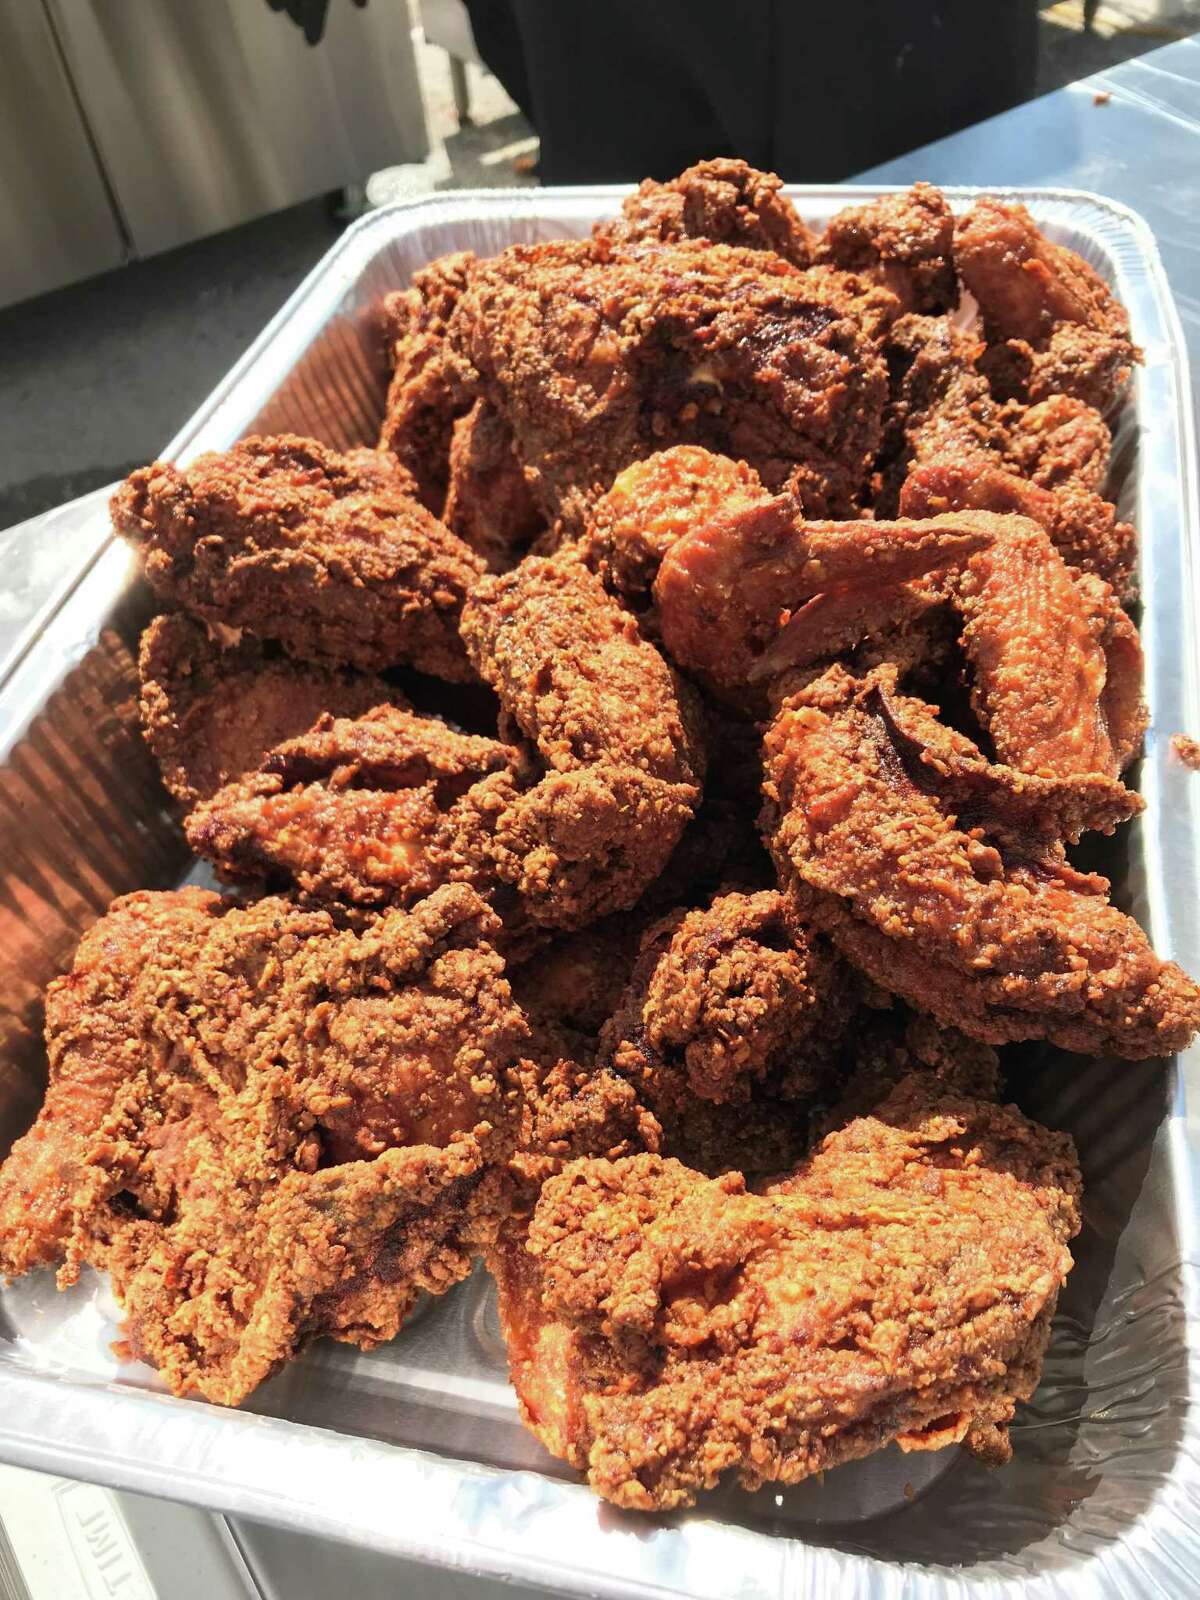 Killen's Barbecue 3613 E. Broadway St.; 281-485-2272 Hospitality workers and first responders are invited to enjoy a free chicken sandwich and side of French fries at Killen's fried chicken pop-up on Sunday, April 12. The event begins at 12 p.m.